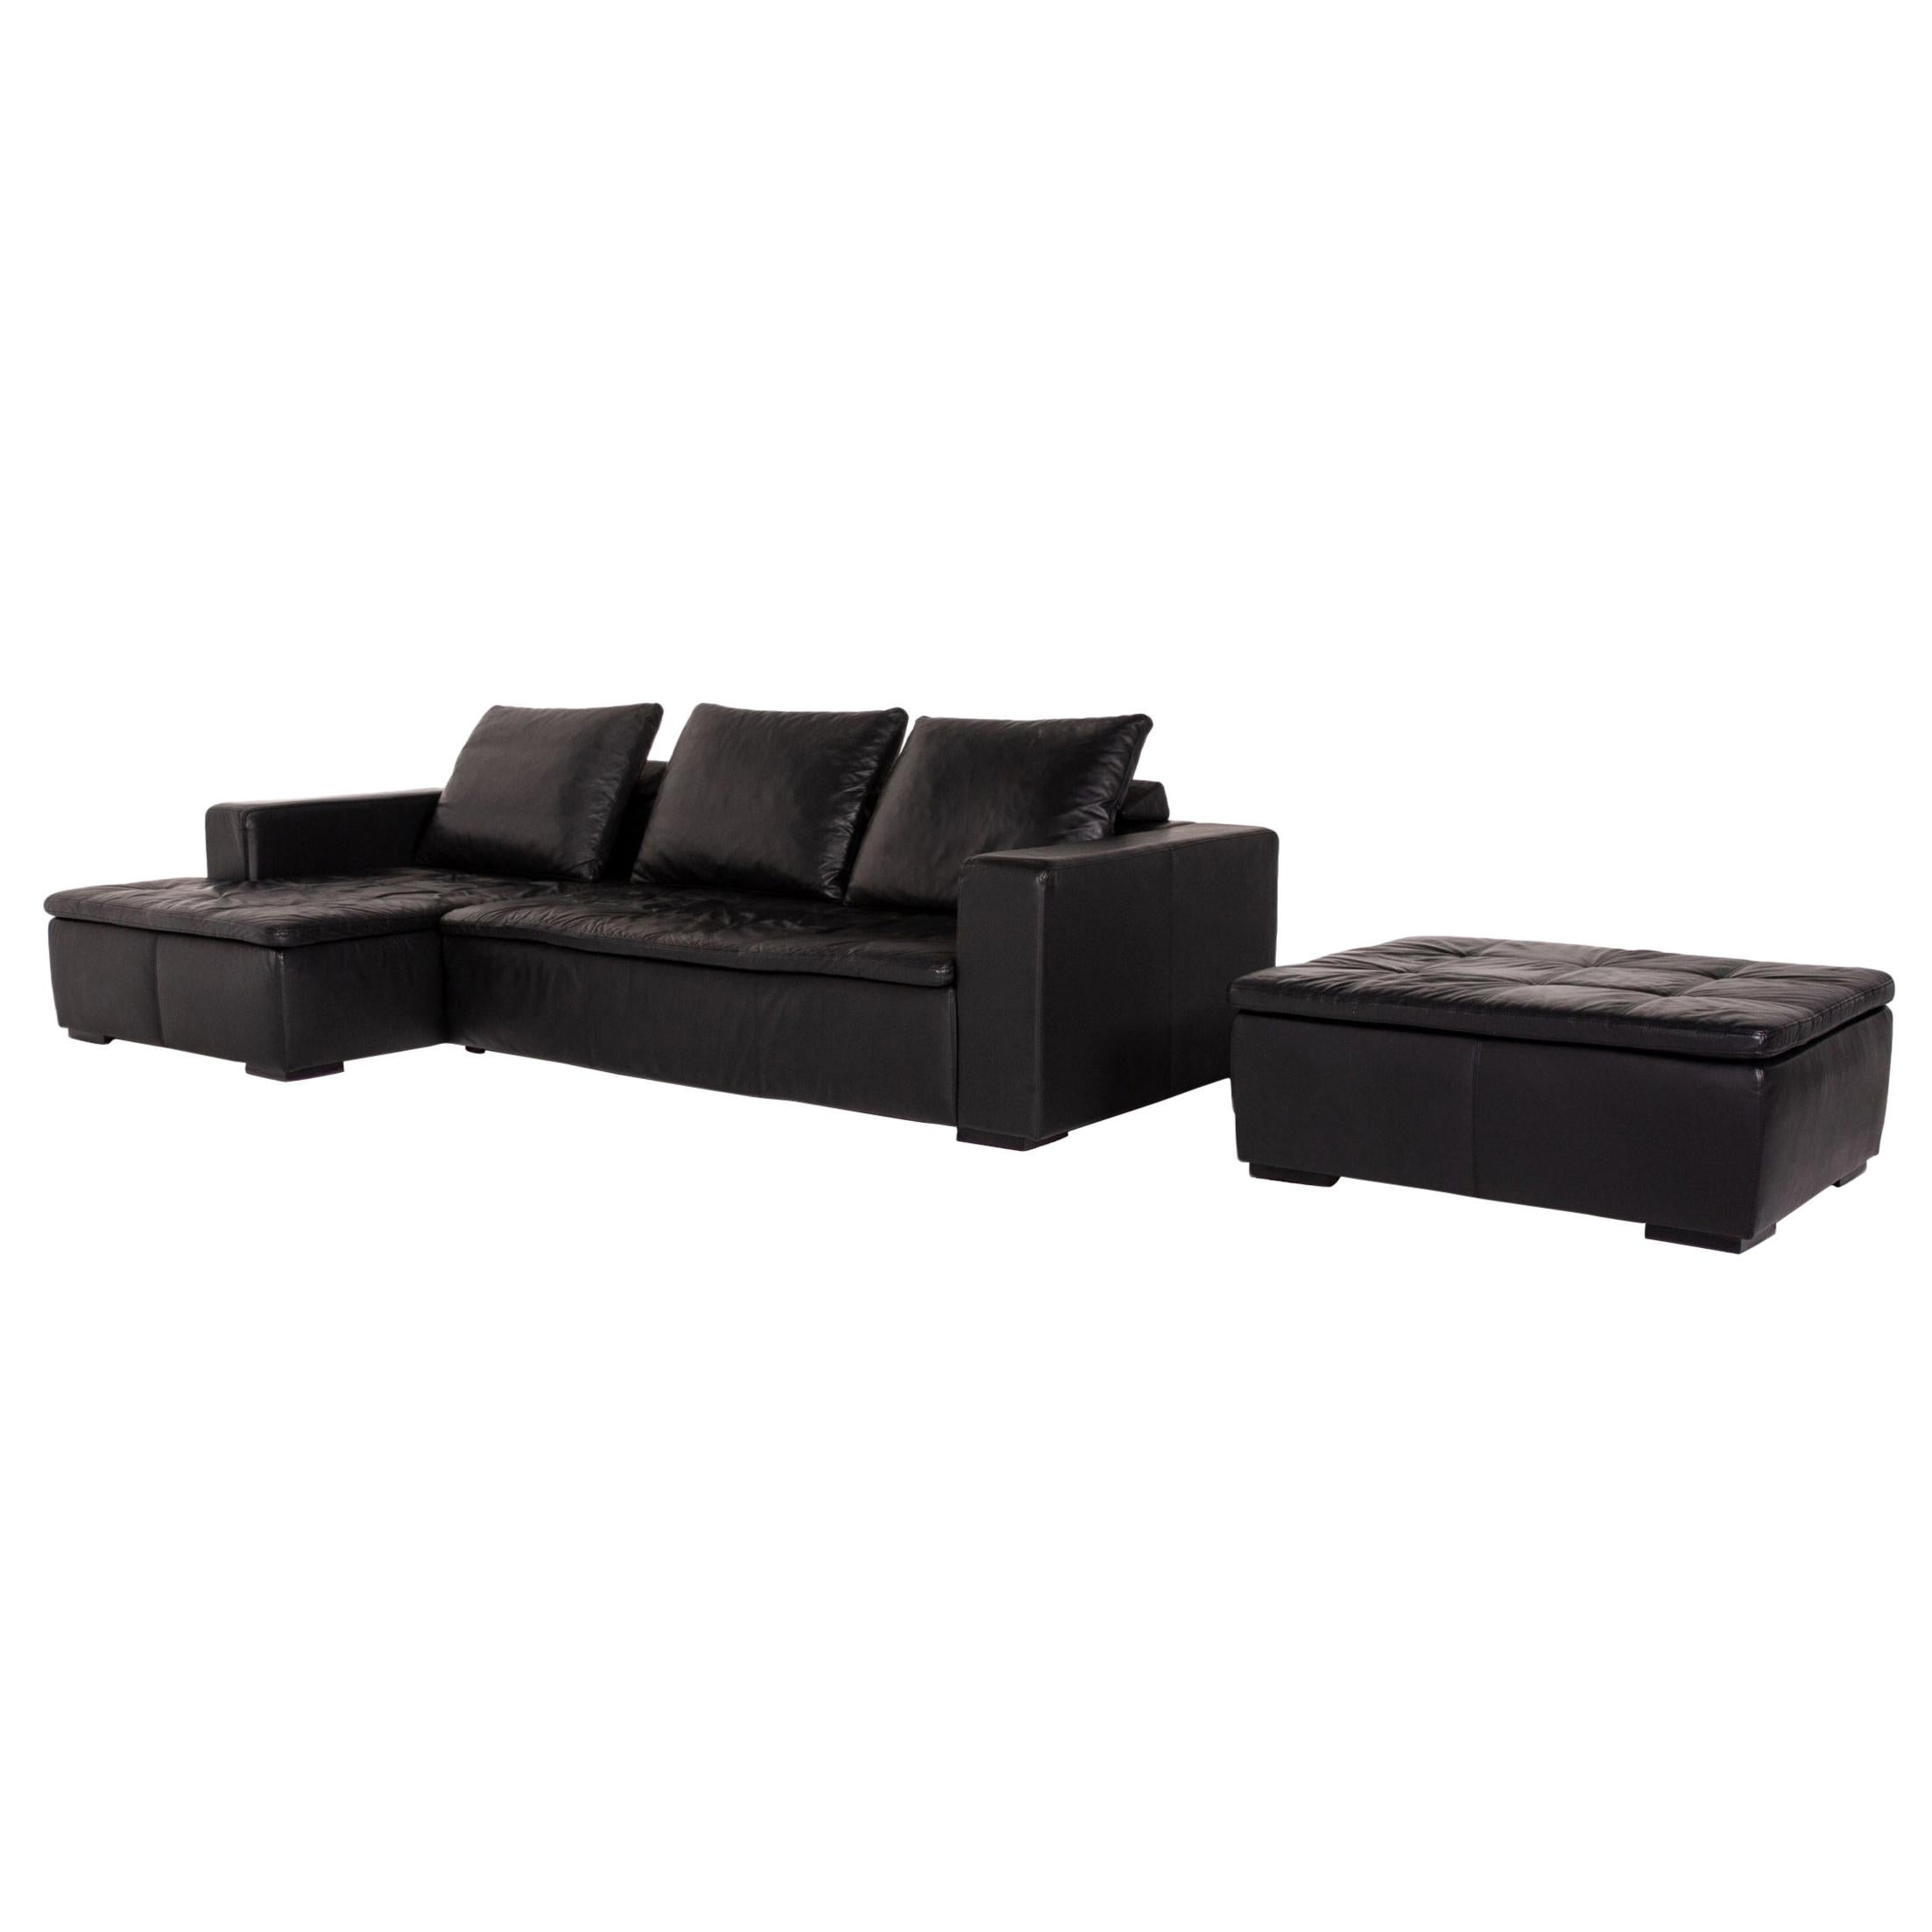 We present to you a BoConcept Mezzo leather sofa set black 1 corner sofa 1 stool.


 Product measurements in centimeters:
 

Depth 108
Width 155
Height 87
Seat height 40
Rest height 60
Seat depth 110
Seat width 241
Back height 45.

 